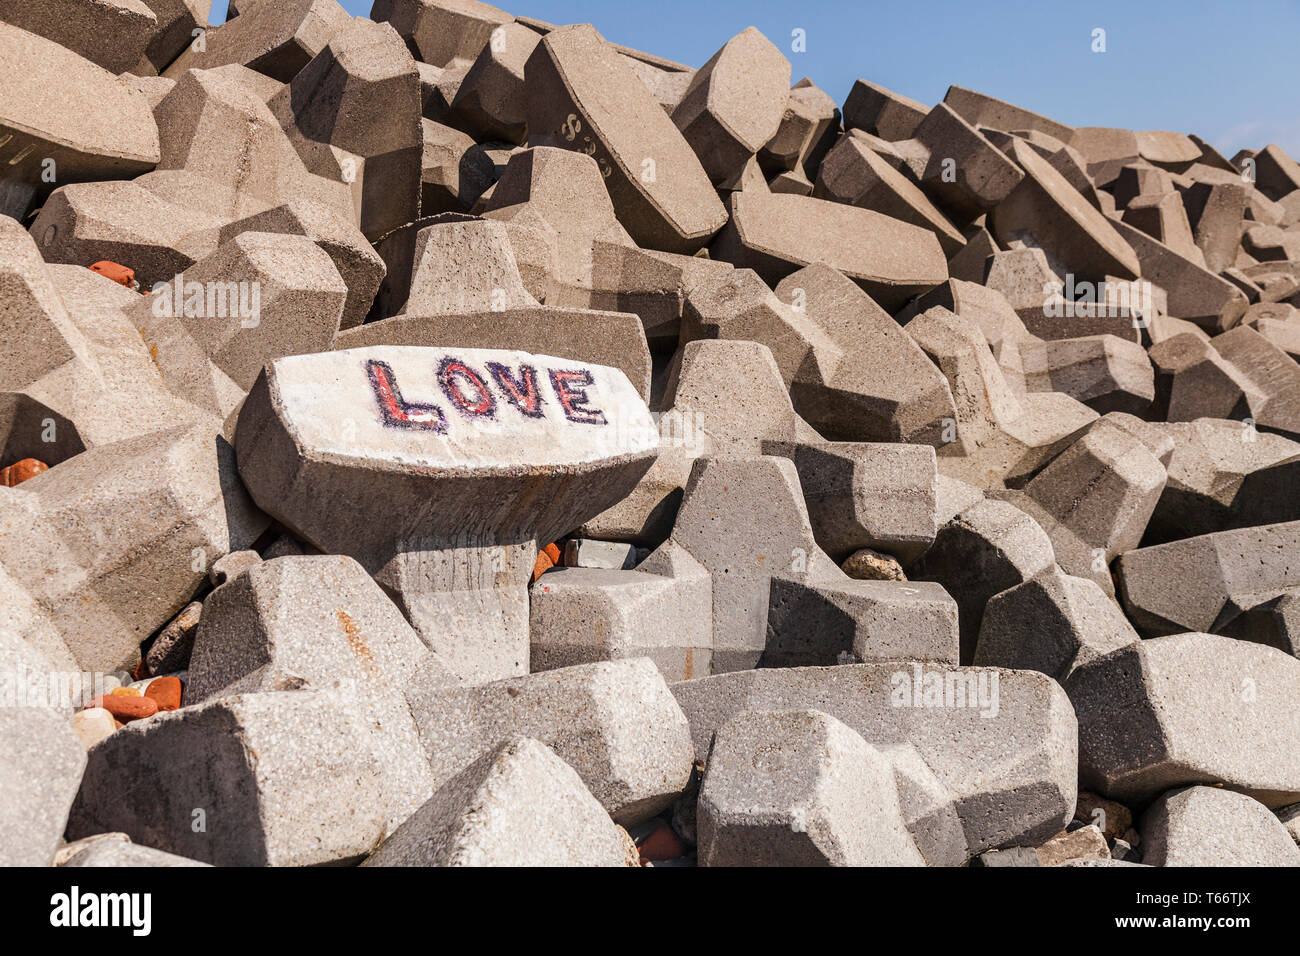 A concept of 'Love on the Rocks' at Hartlepool,England,UK with the word 'Love' daubed in graffitti on the rocks on the beach Stock Photo